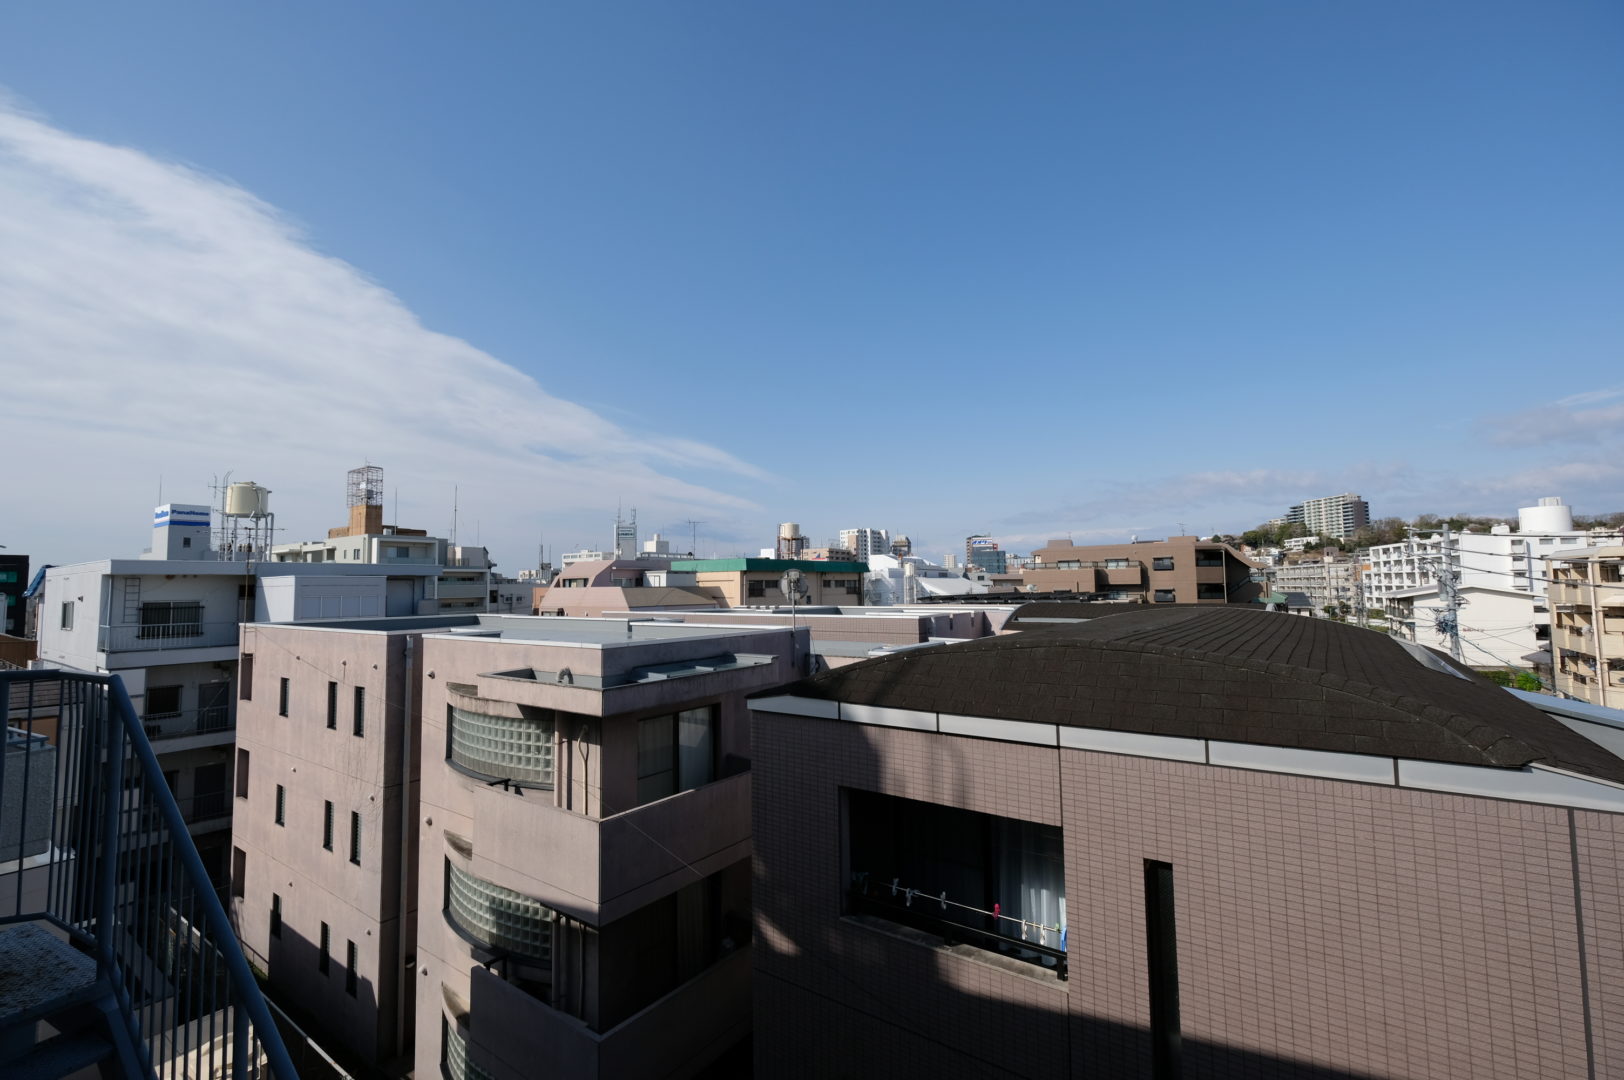 A 3rd floor view of a cityscape in suburban Nagoya Japan